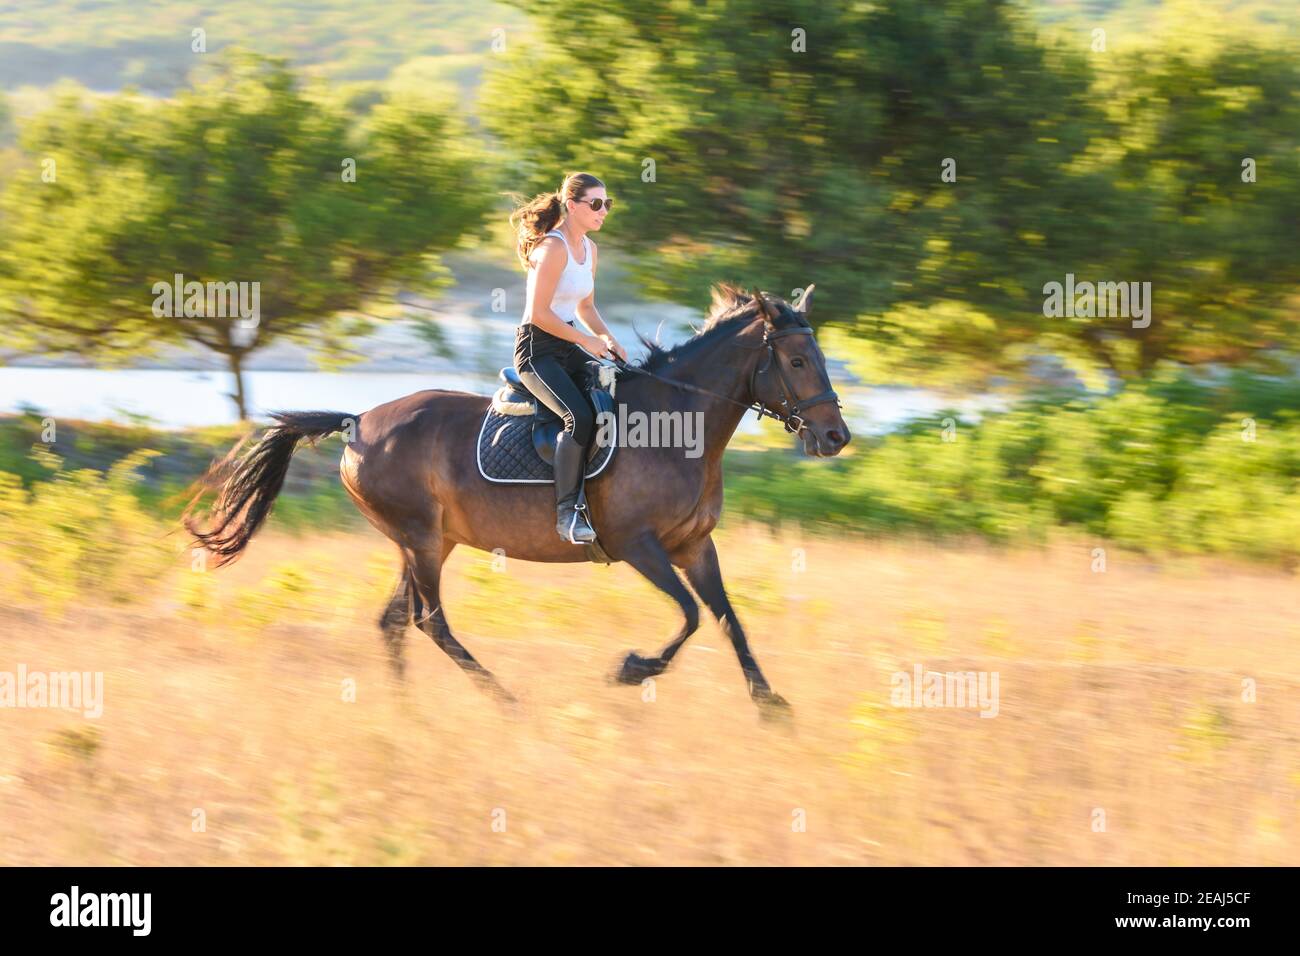 Horse Jogging High Resolution Stock Photography and Images - Alamy